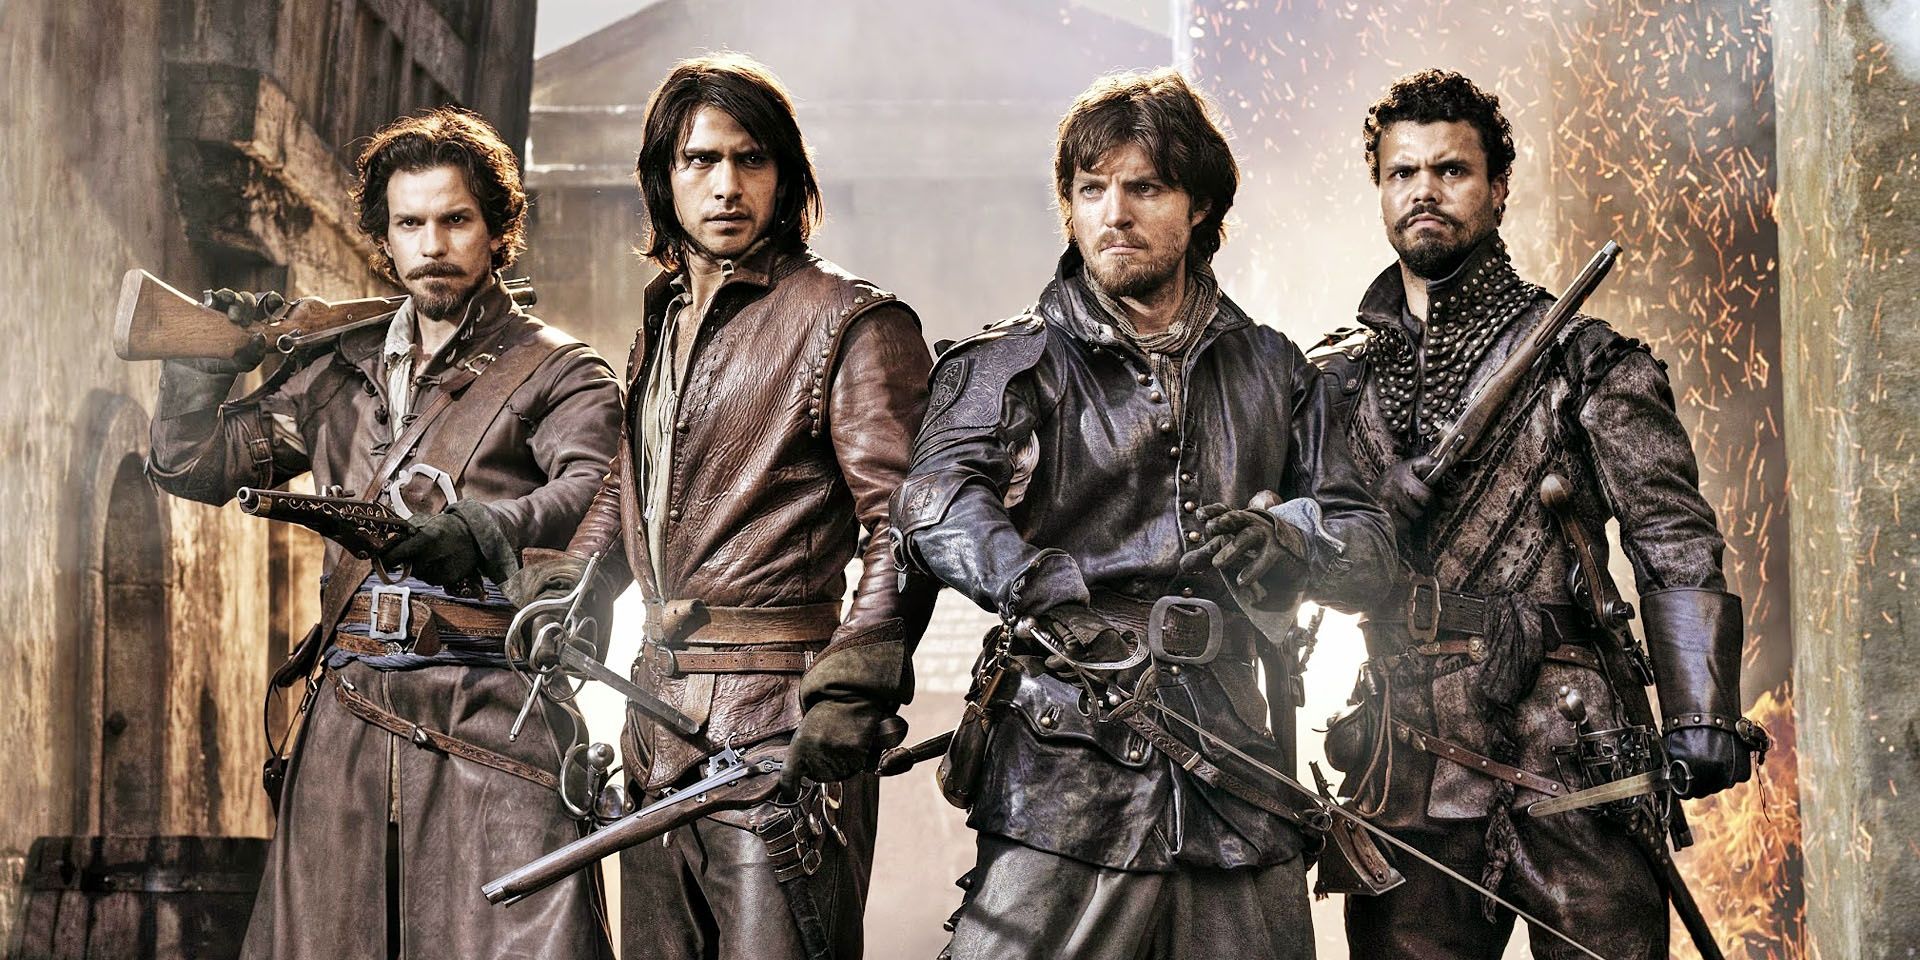 The Musketeers in The Musketeers